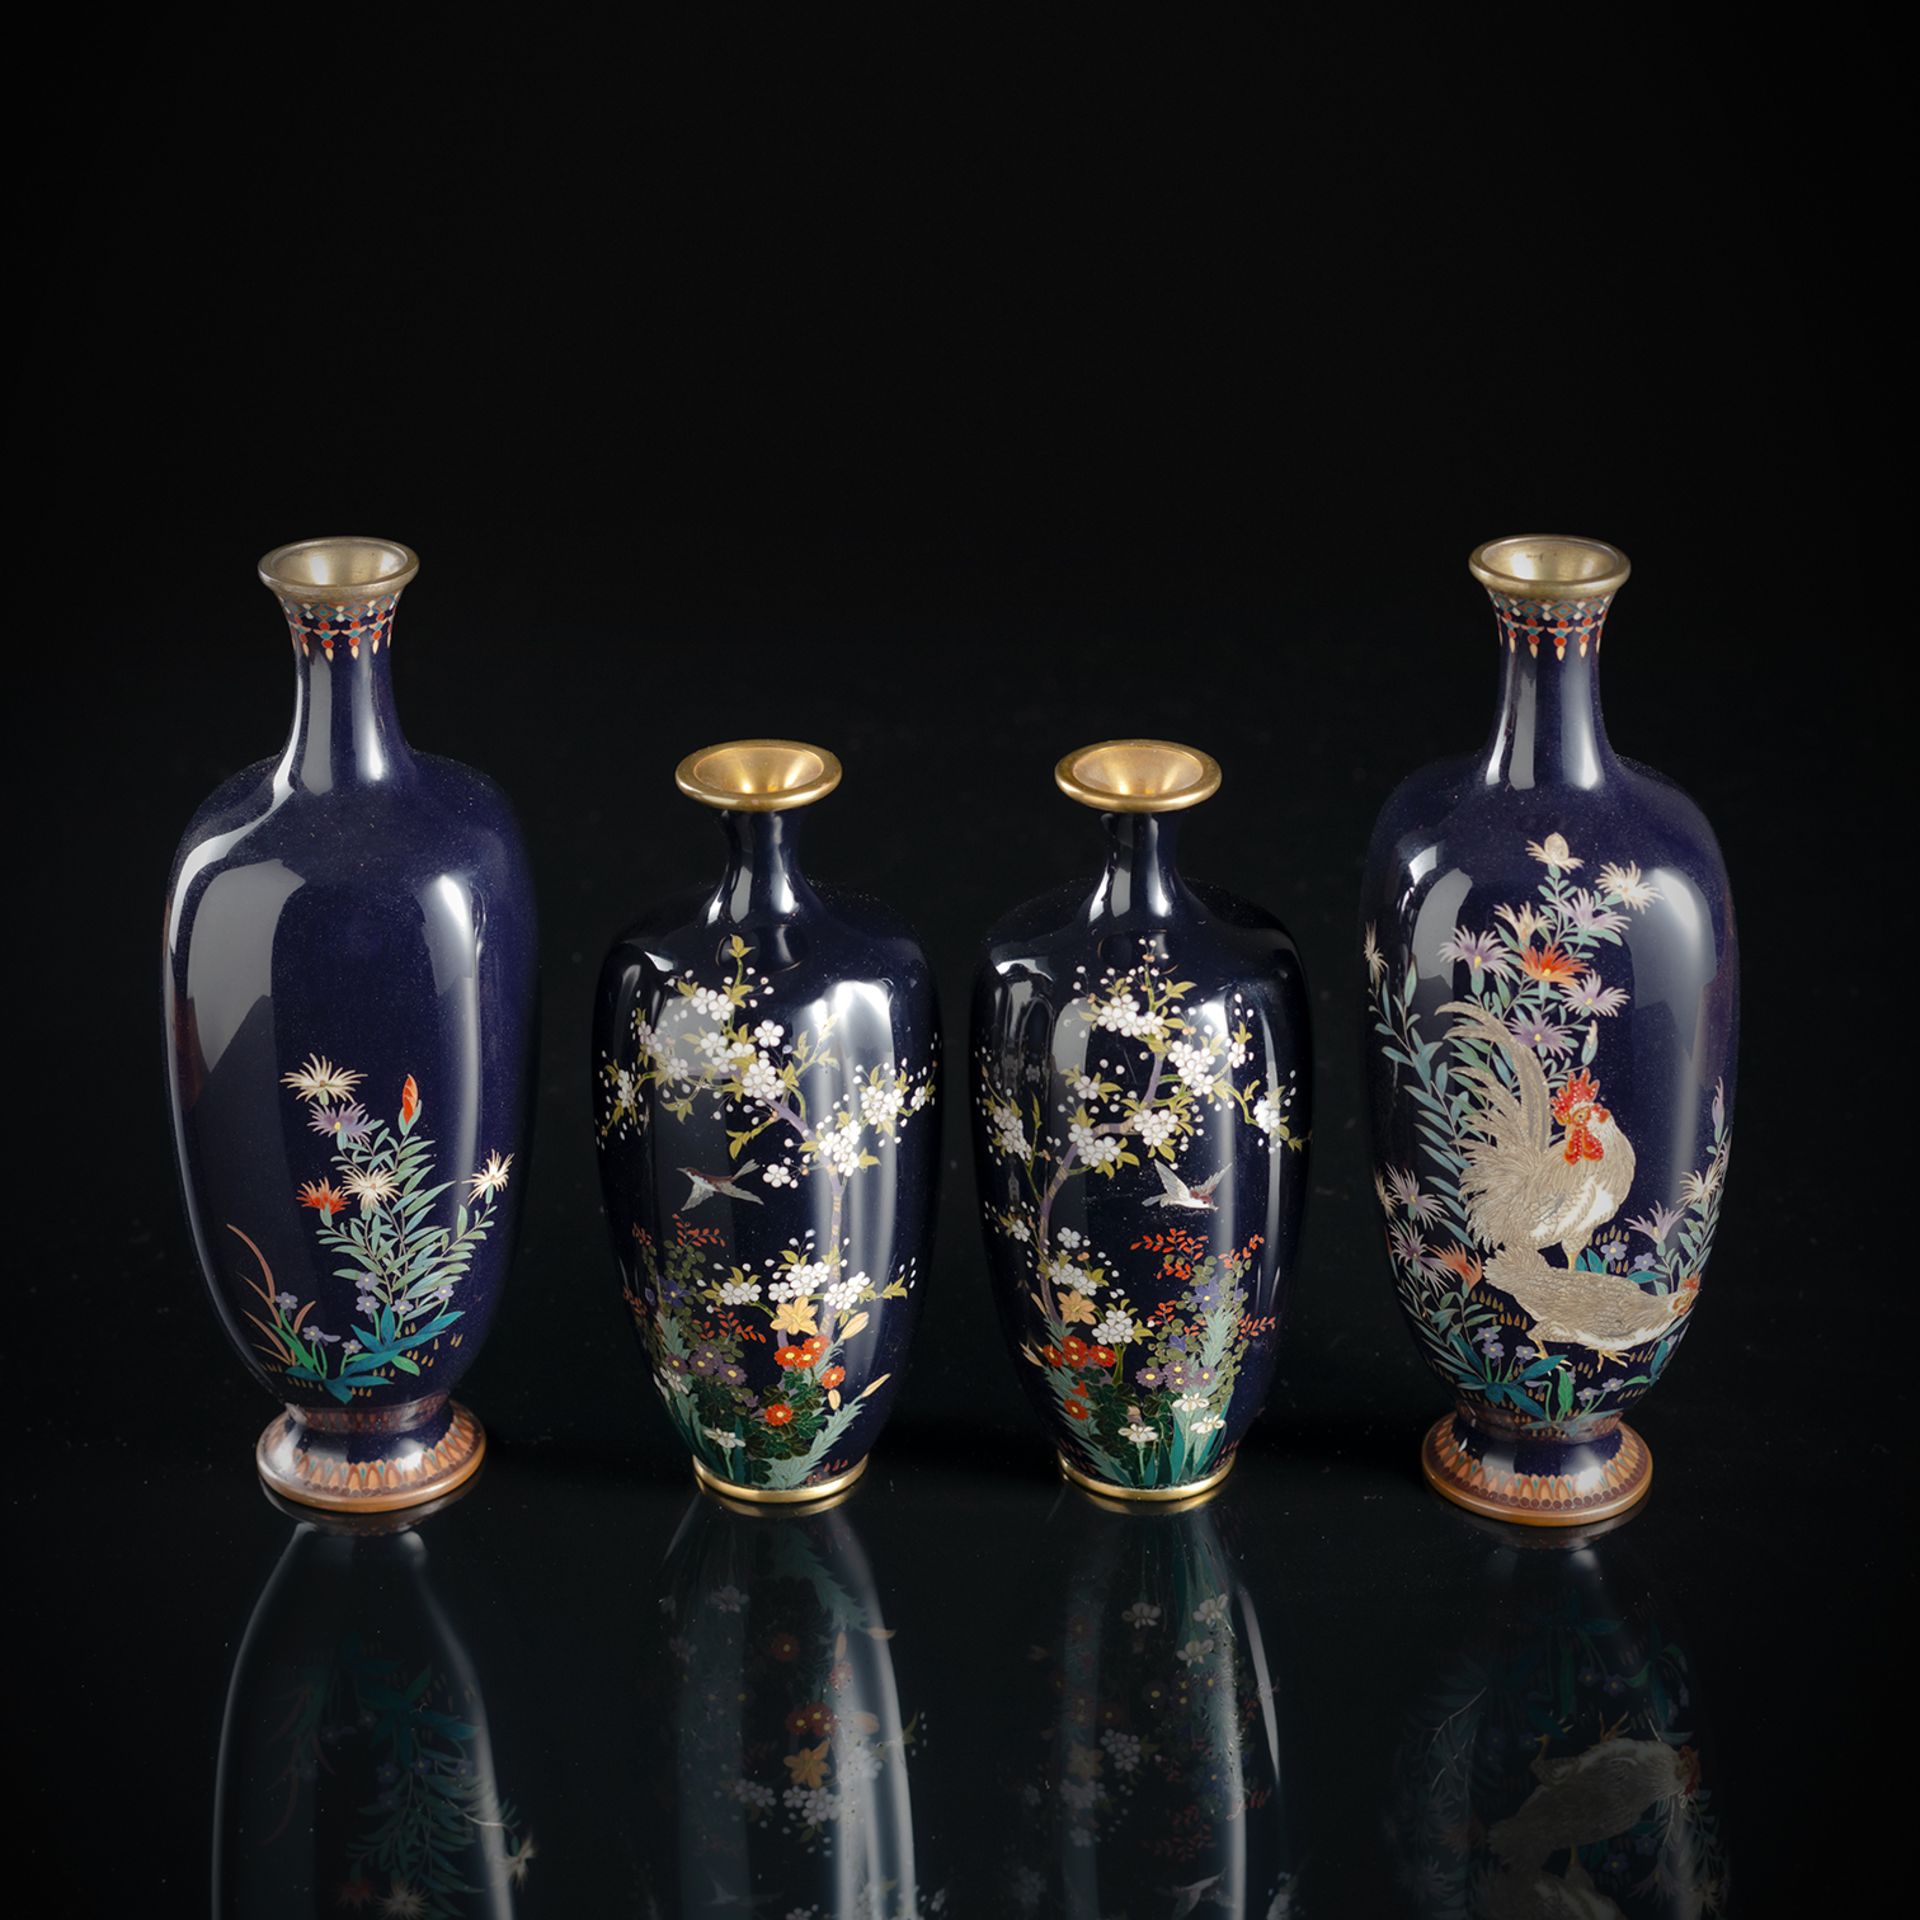 A FINE PAIR OC CLOISONNÉ ENAMEL CHICKEN VASES AND A PAIR OF CHIDORI AND FLOWER VASES